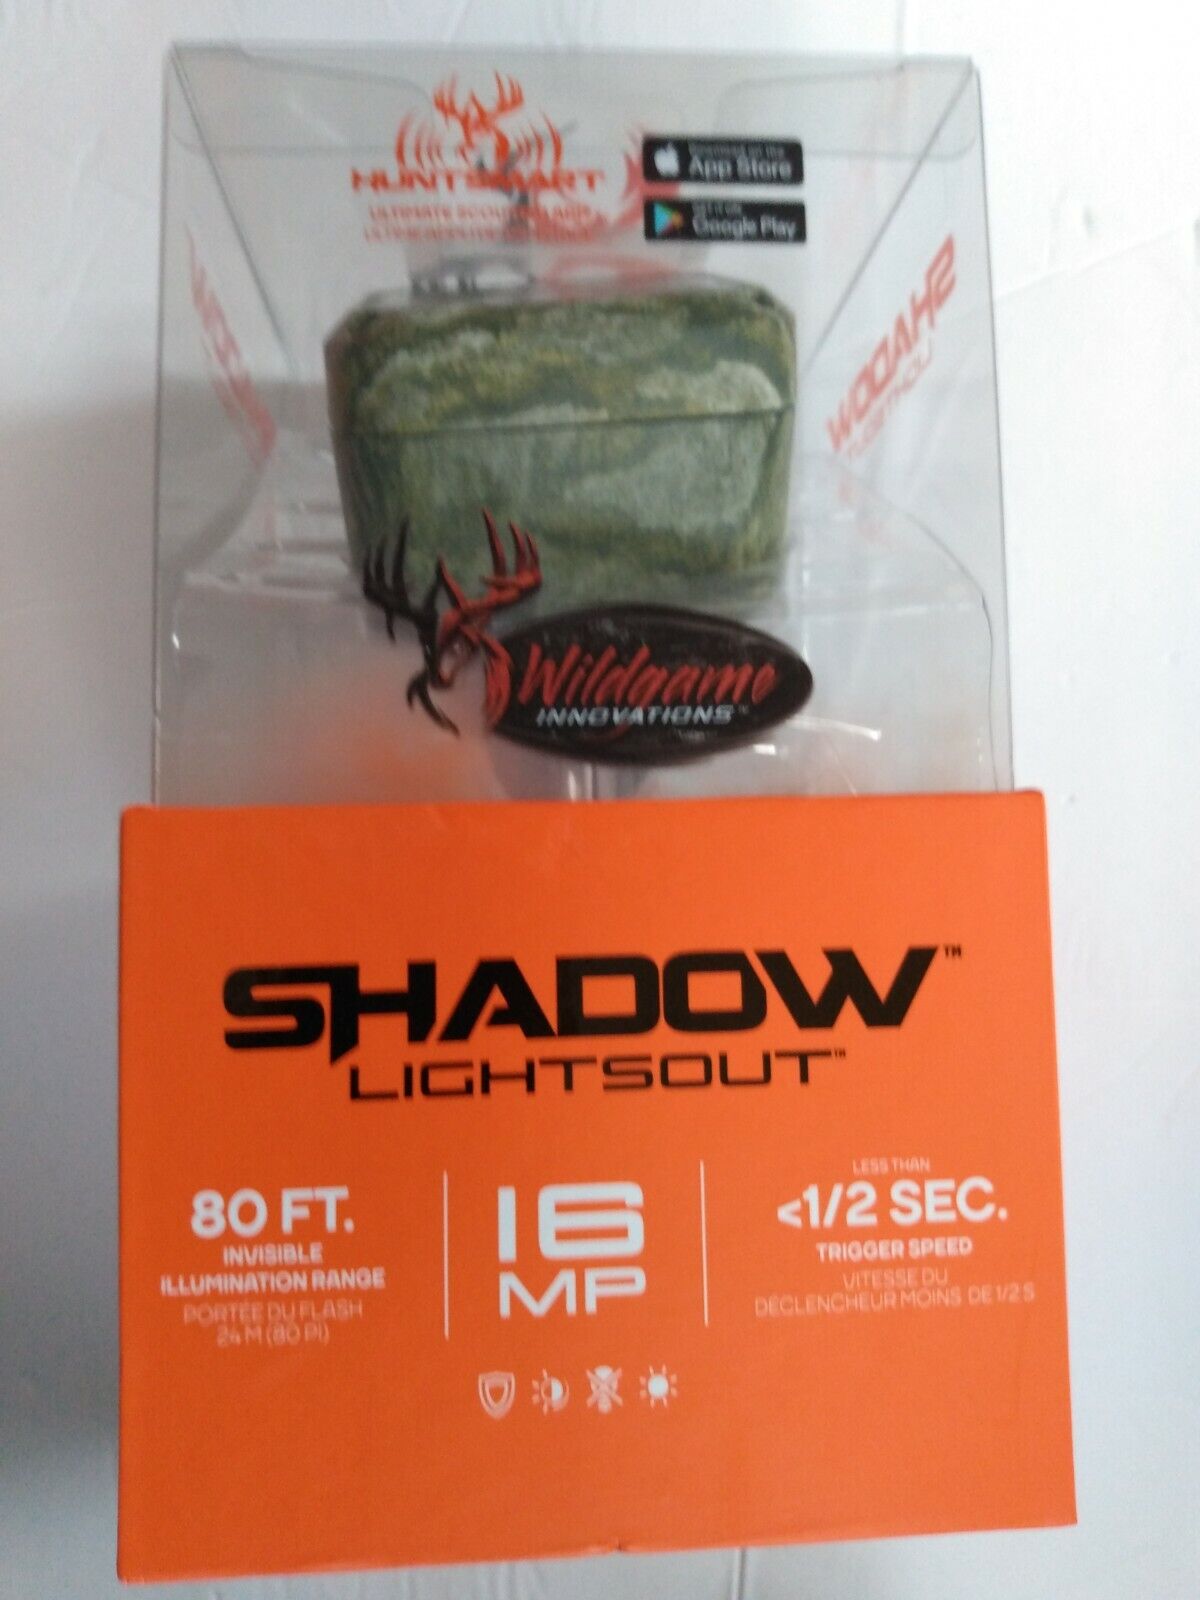 WILDGAME INNOVATIONS SHADOW LIGHTSOUT 16MP TRAIL CAMERA BRAND NEW